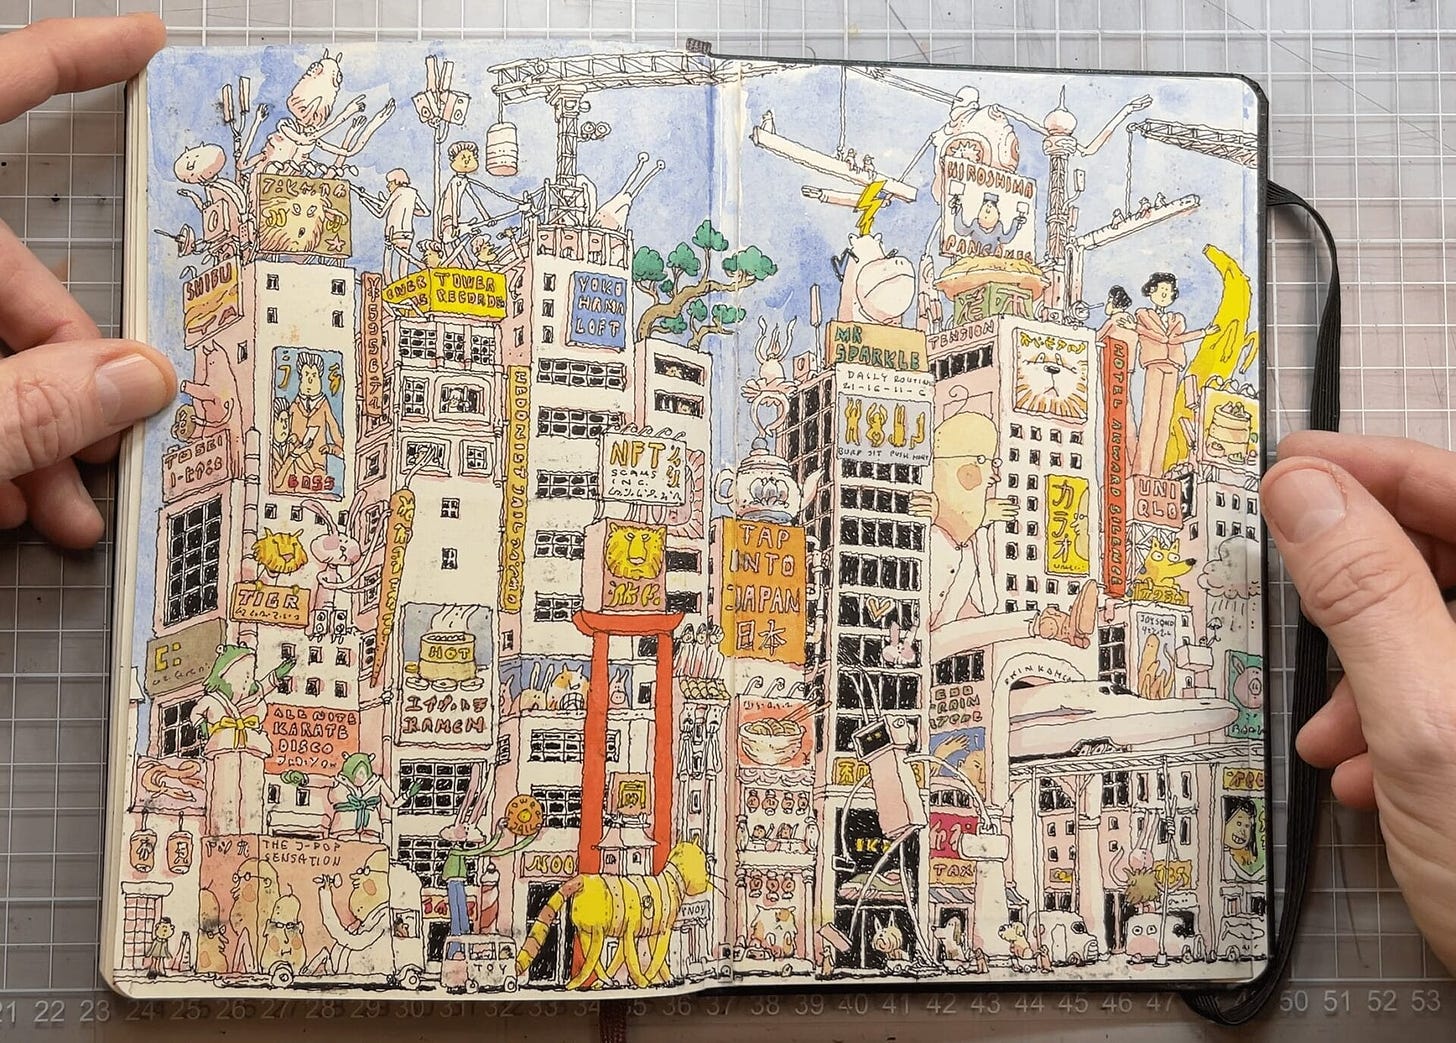 A spread of an illustrated sketchbook.